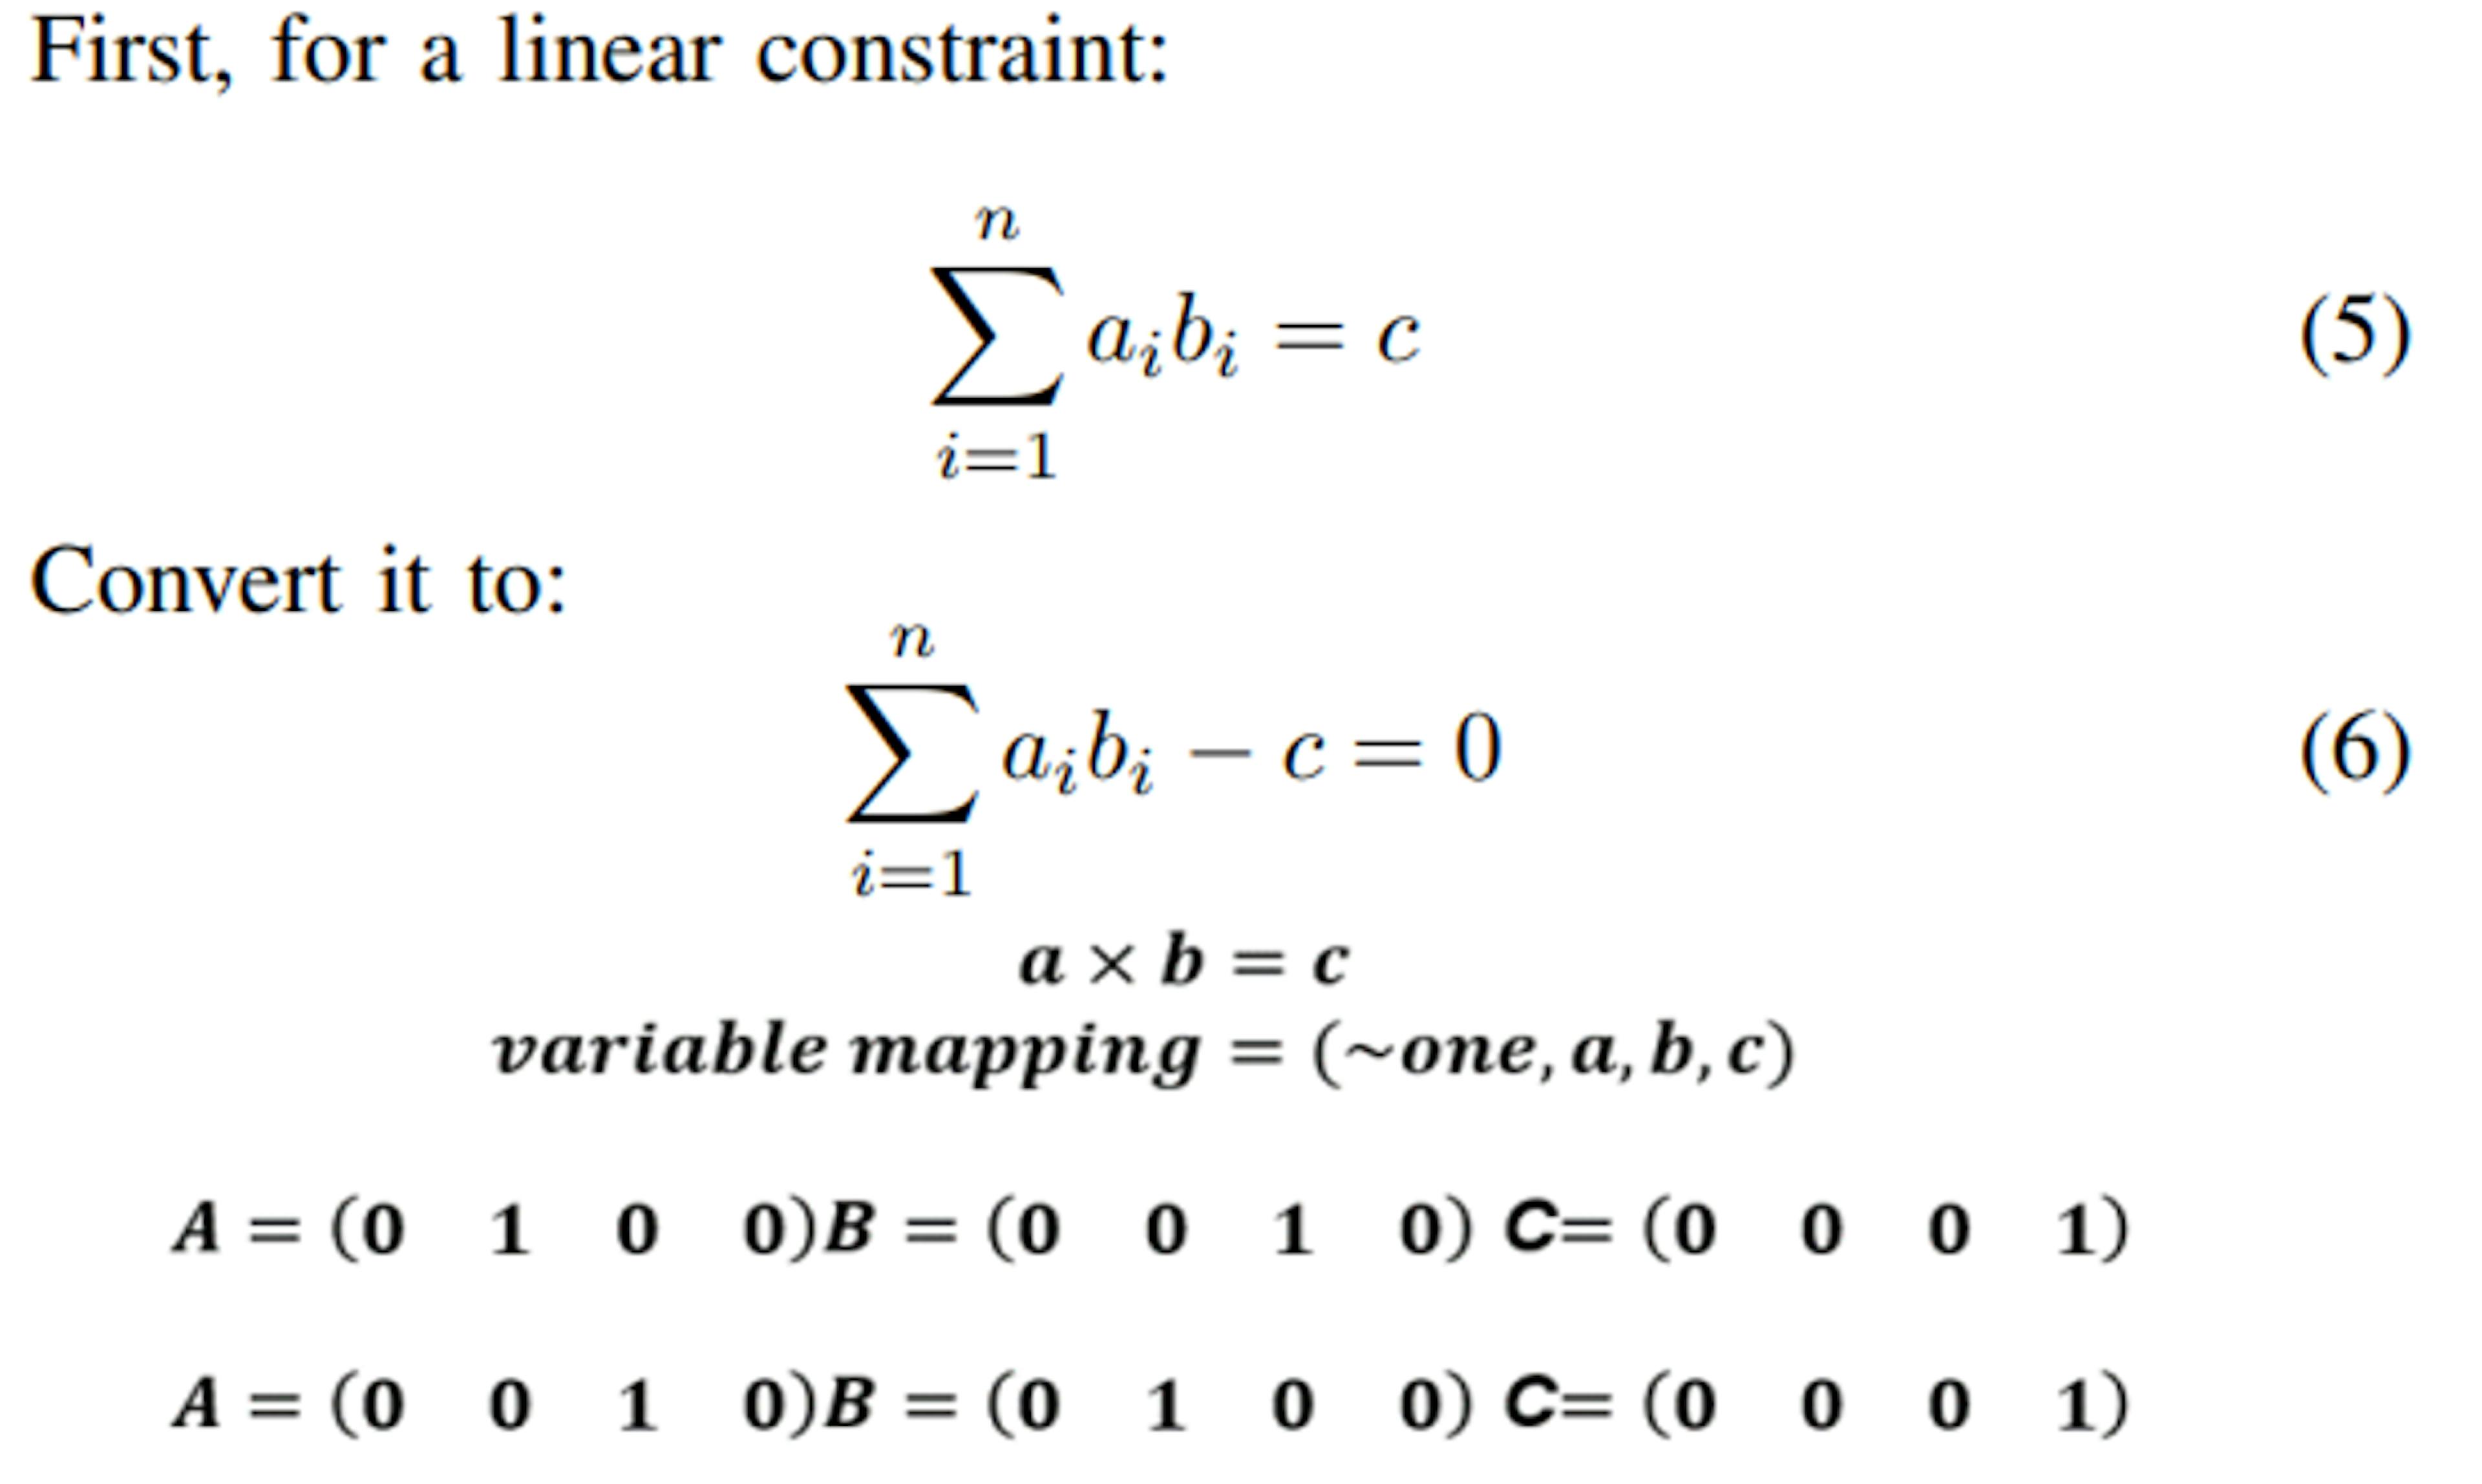 Fig. 9. Two equivalent expressions of a quadratic constraint.